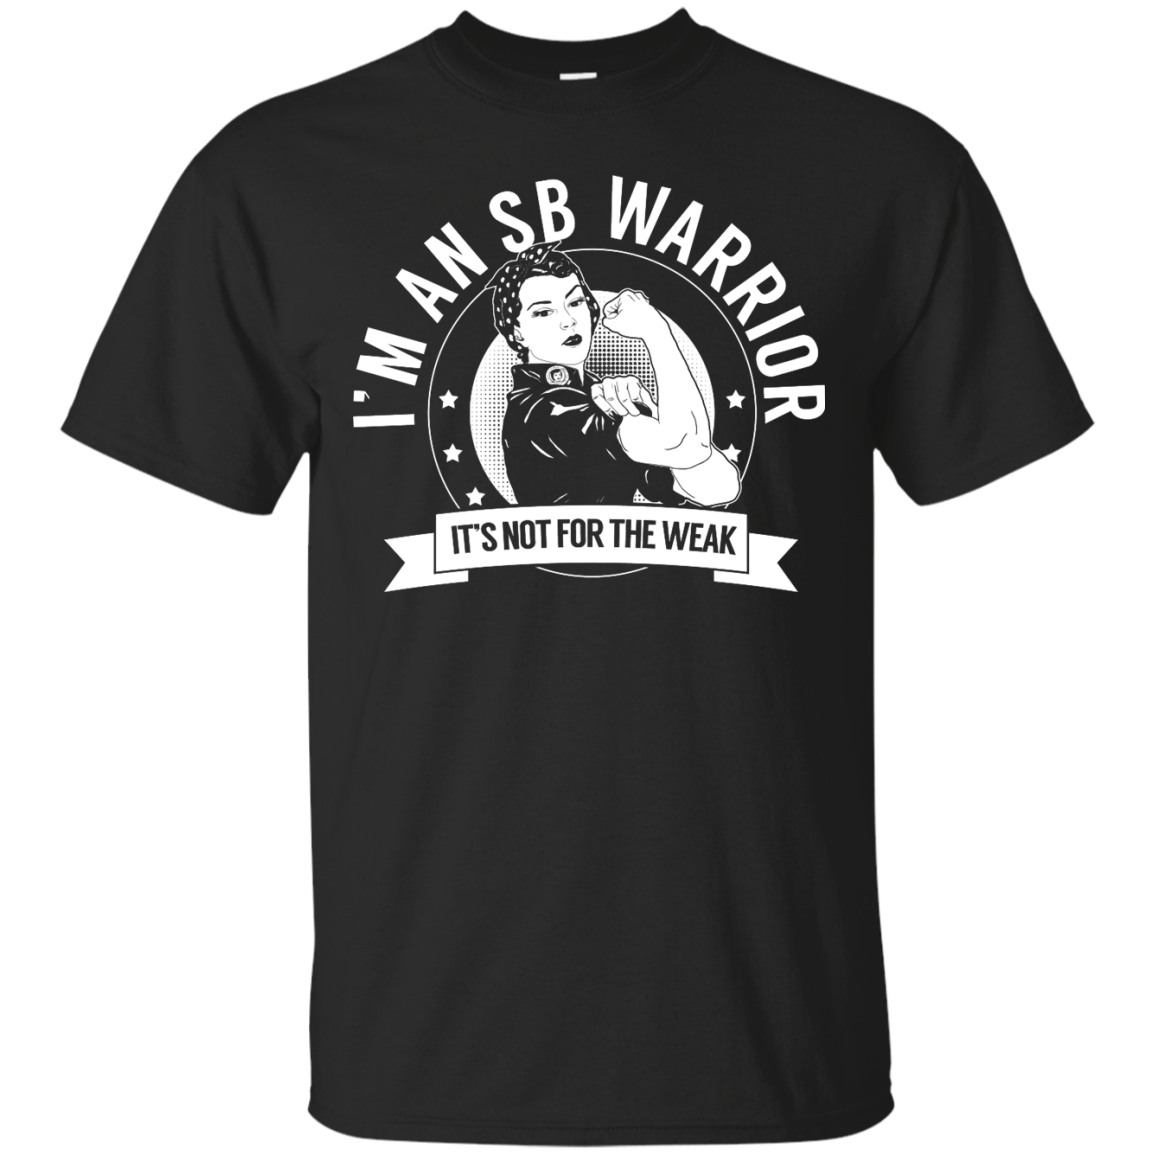 Spina Bifida - SB Warrior Not For The Weak Unisex Shirt - The Unchargeables